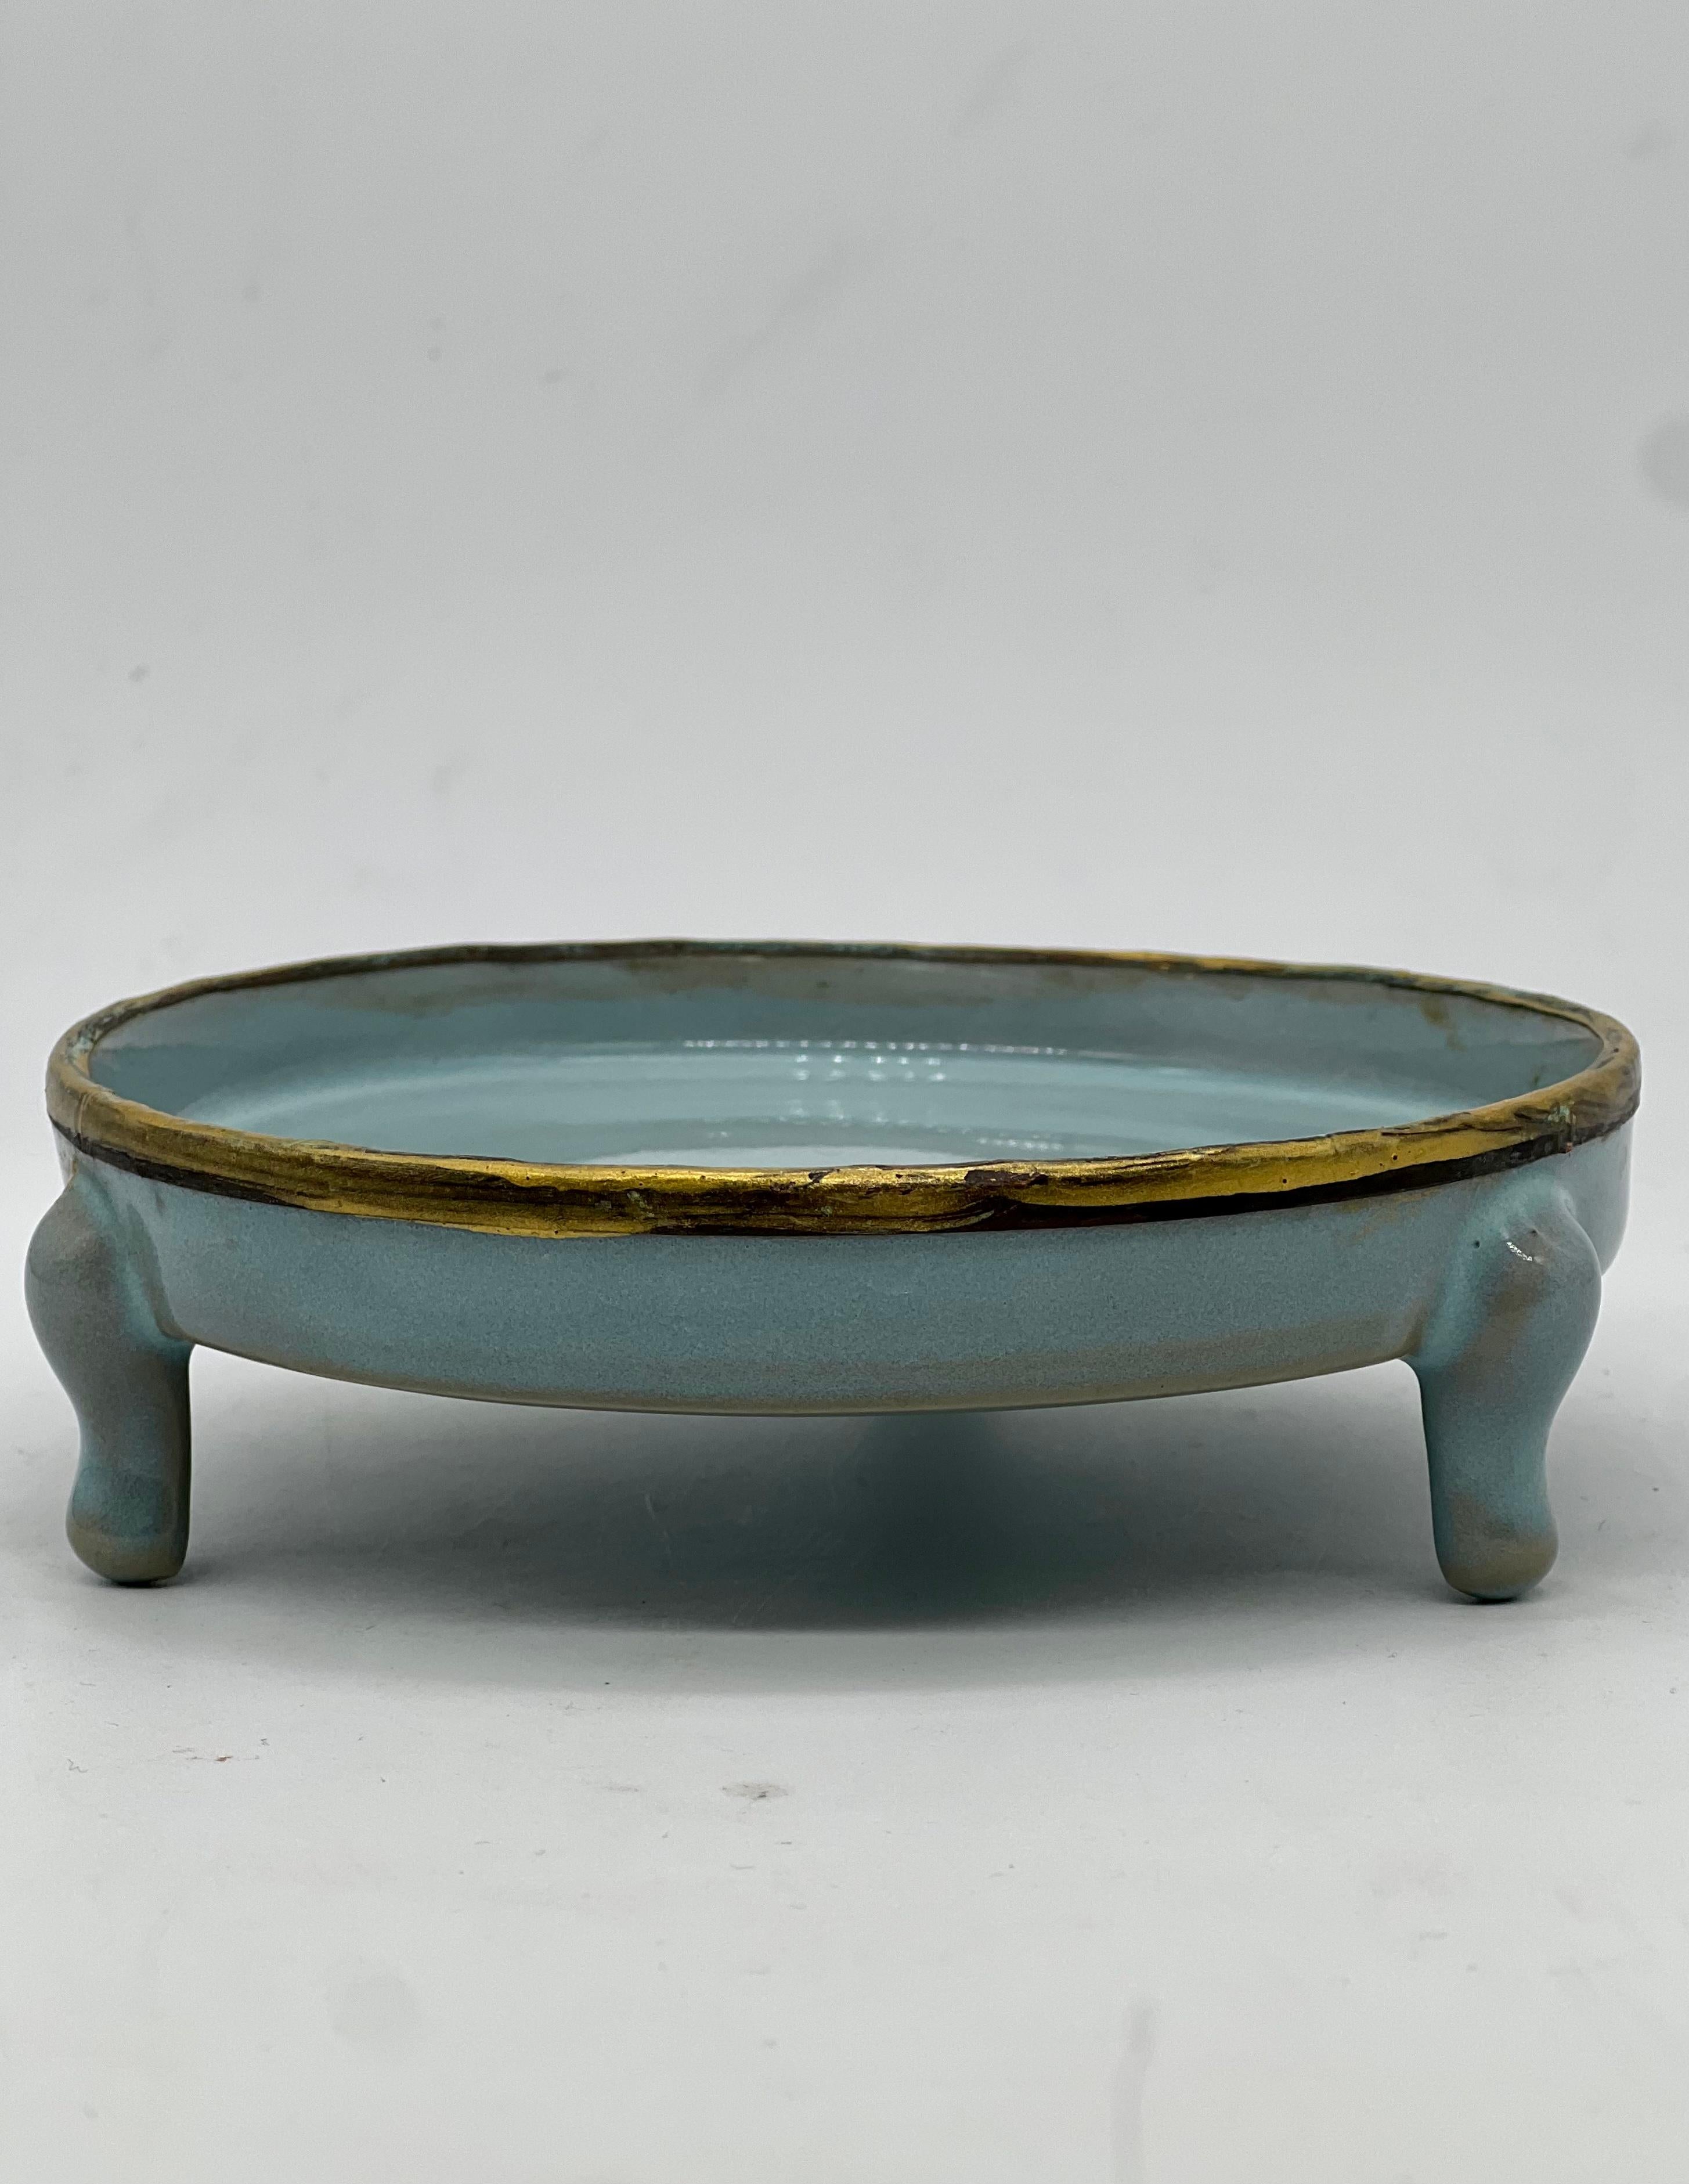 19th Century A FINE 19th C CHINESE THREE LEGGED RU WARE PORCELAIN WASHER/STAND.Qing Dynasty. For Sale